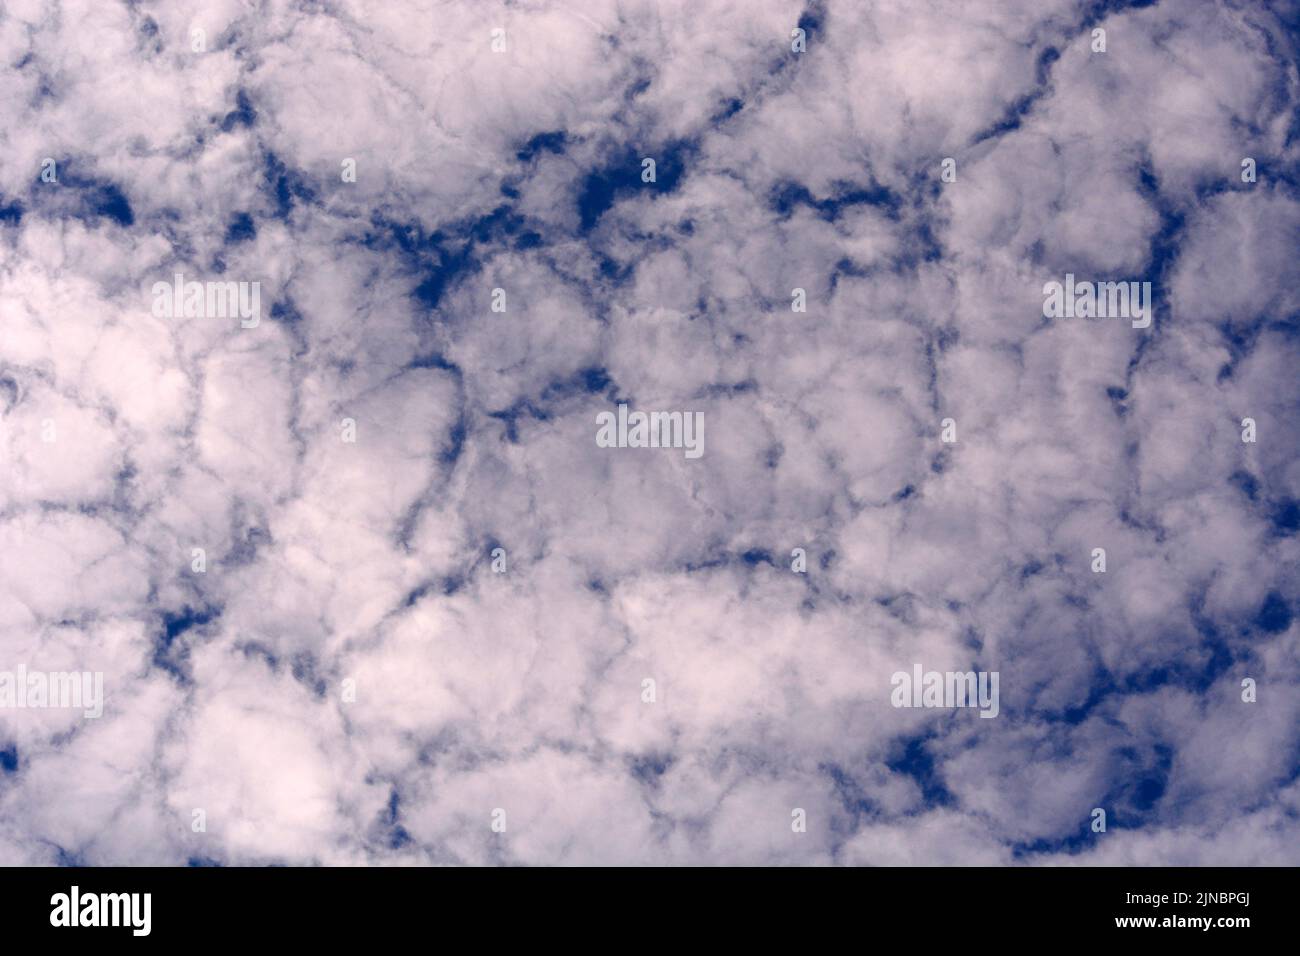 Altocumulus clouds fill the sky over Santa Fe, New Mexico. Stock Photo